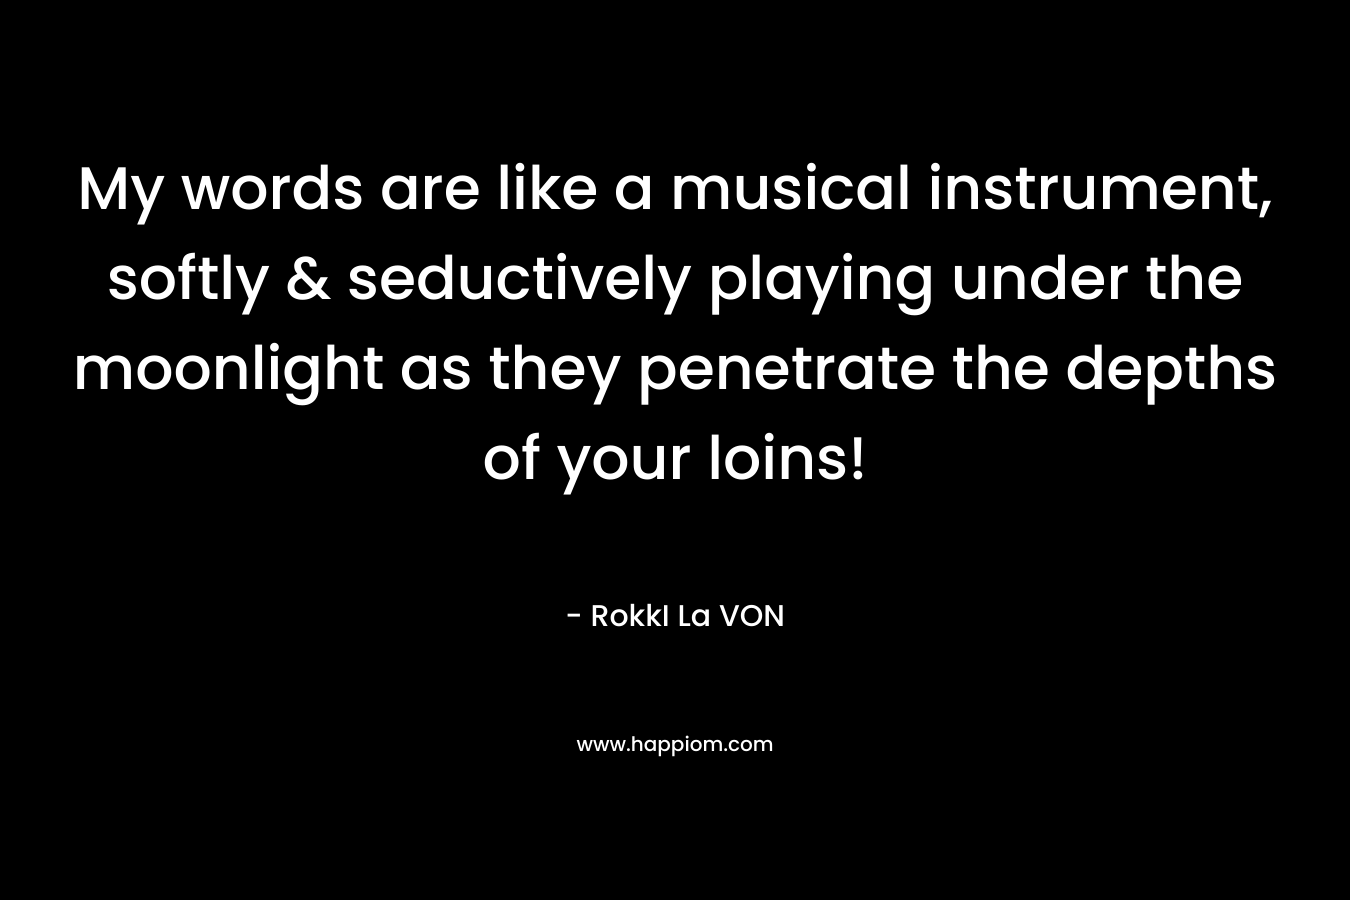 My words are like a musical instrument, softly & seductively playing under the moonlight as they penetrate the depths of your loins! – RokkI La VON